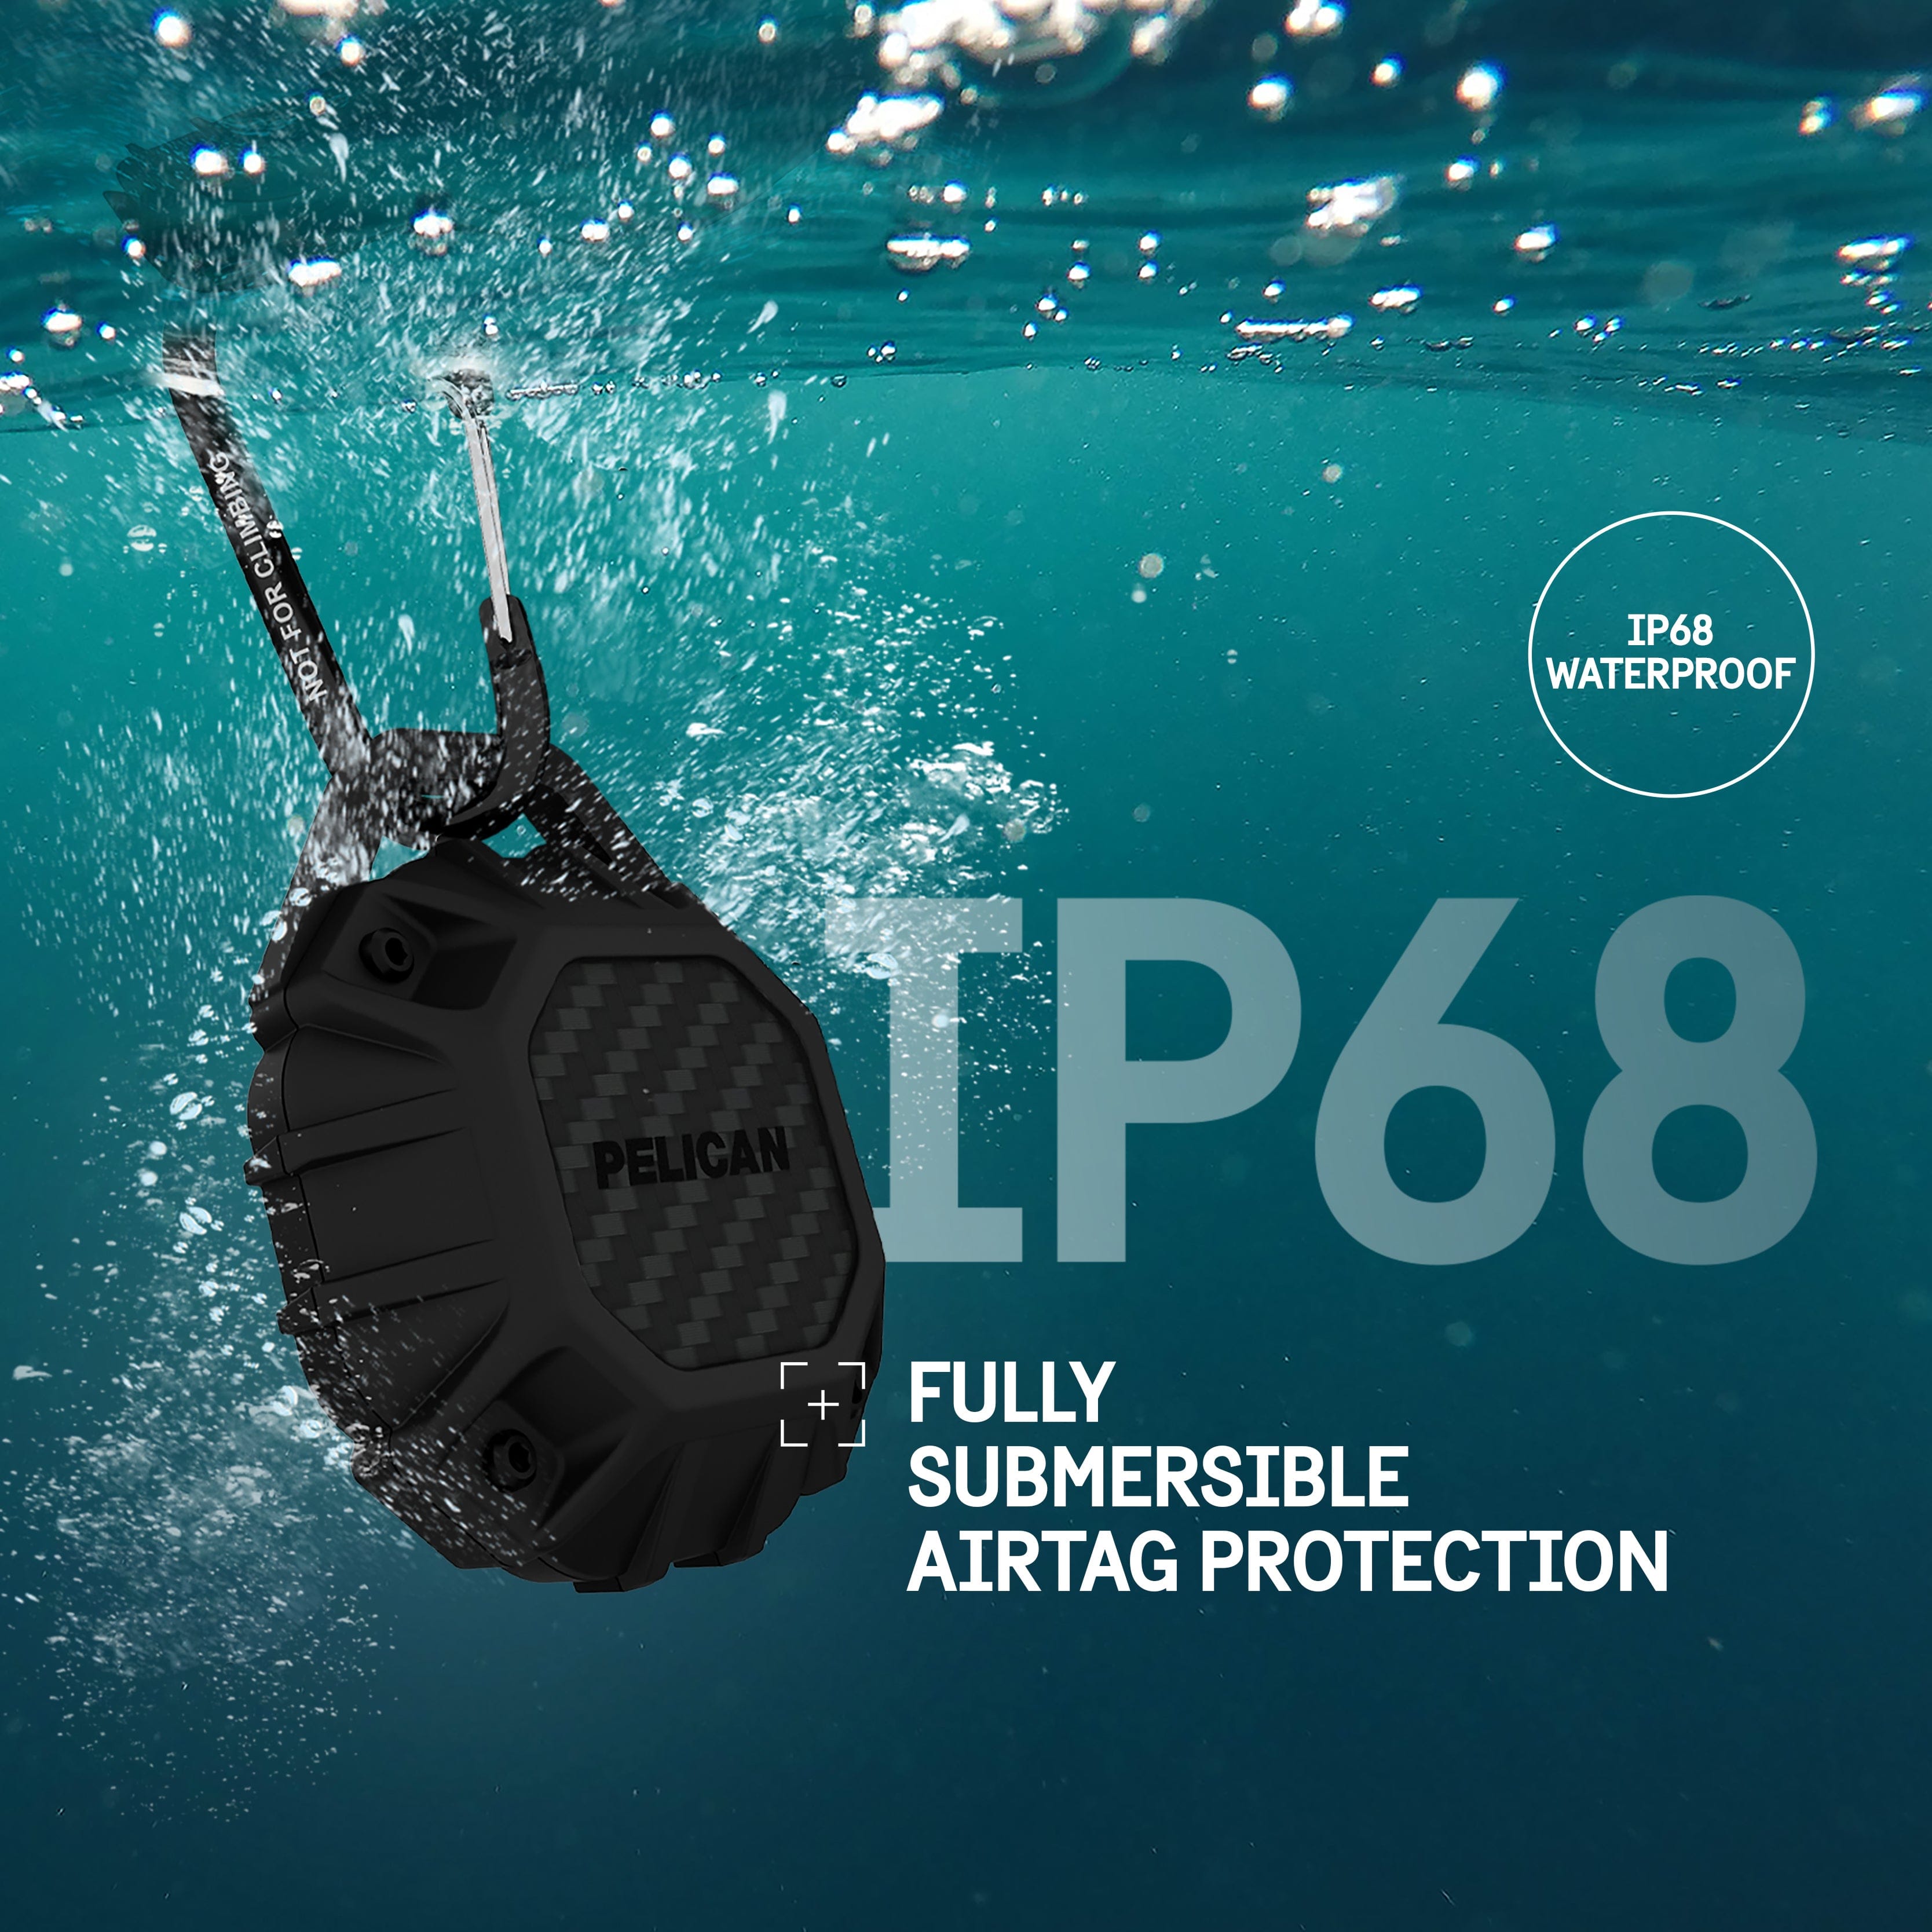 IP68 WATERPROOF. FULLY SUBMERSIBLE AIRTAG PROTECTION